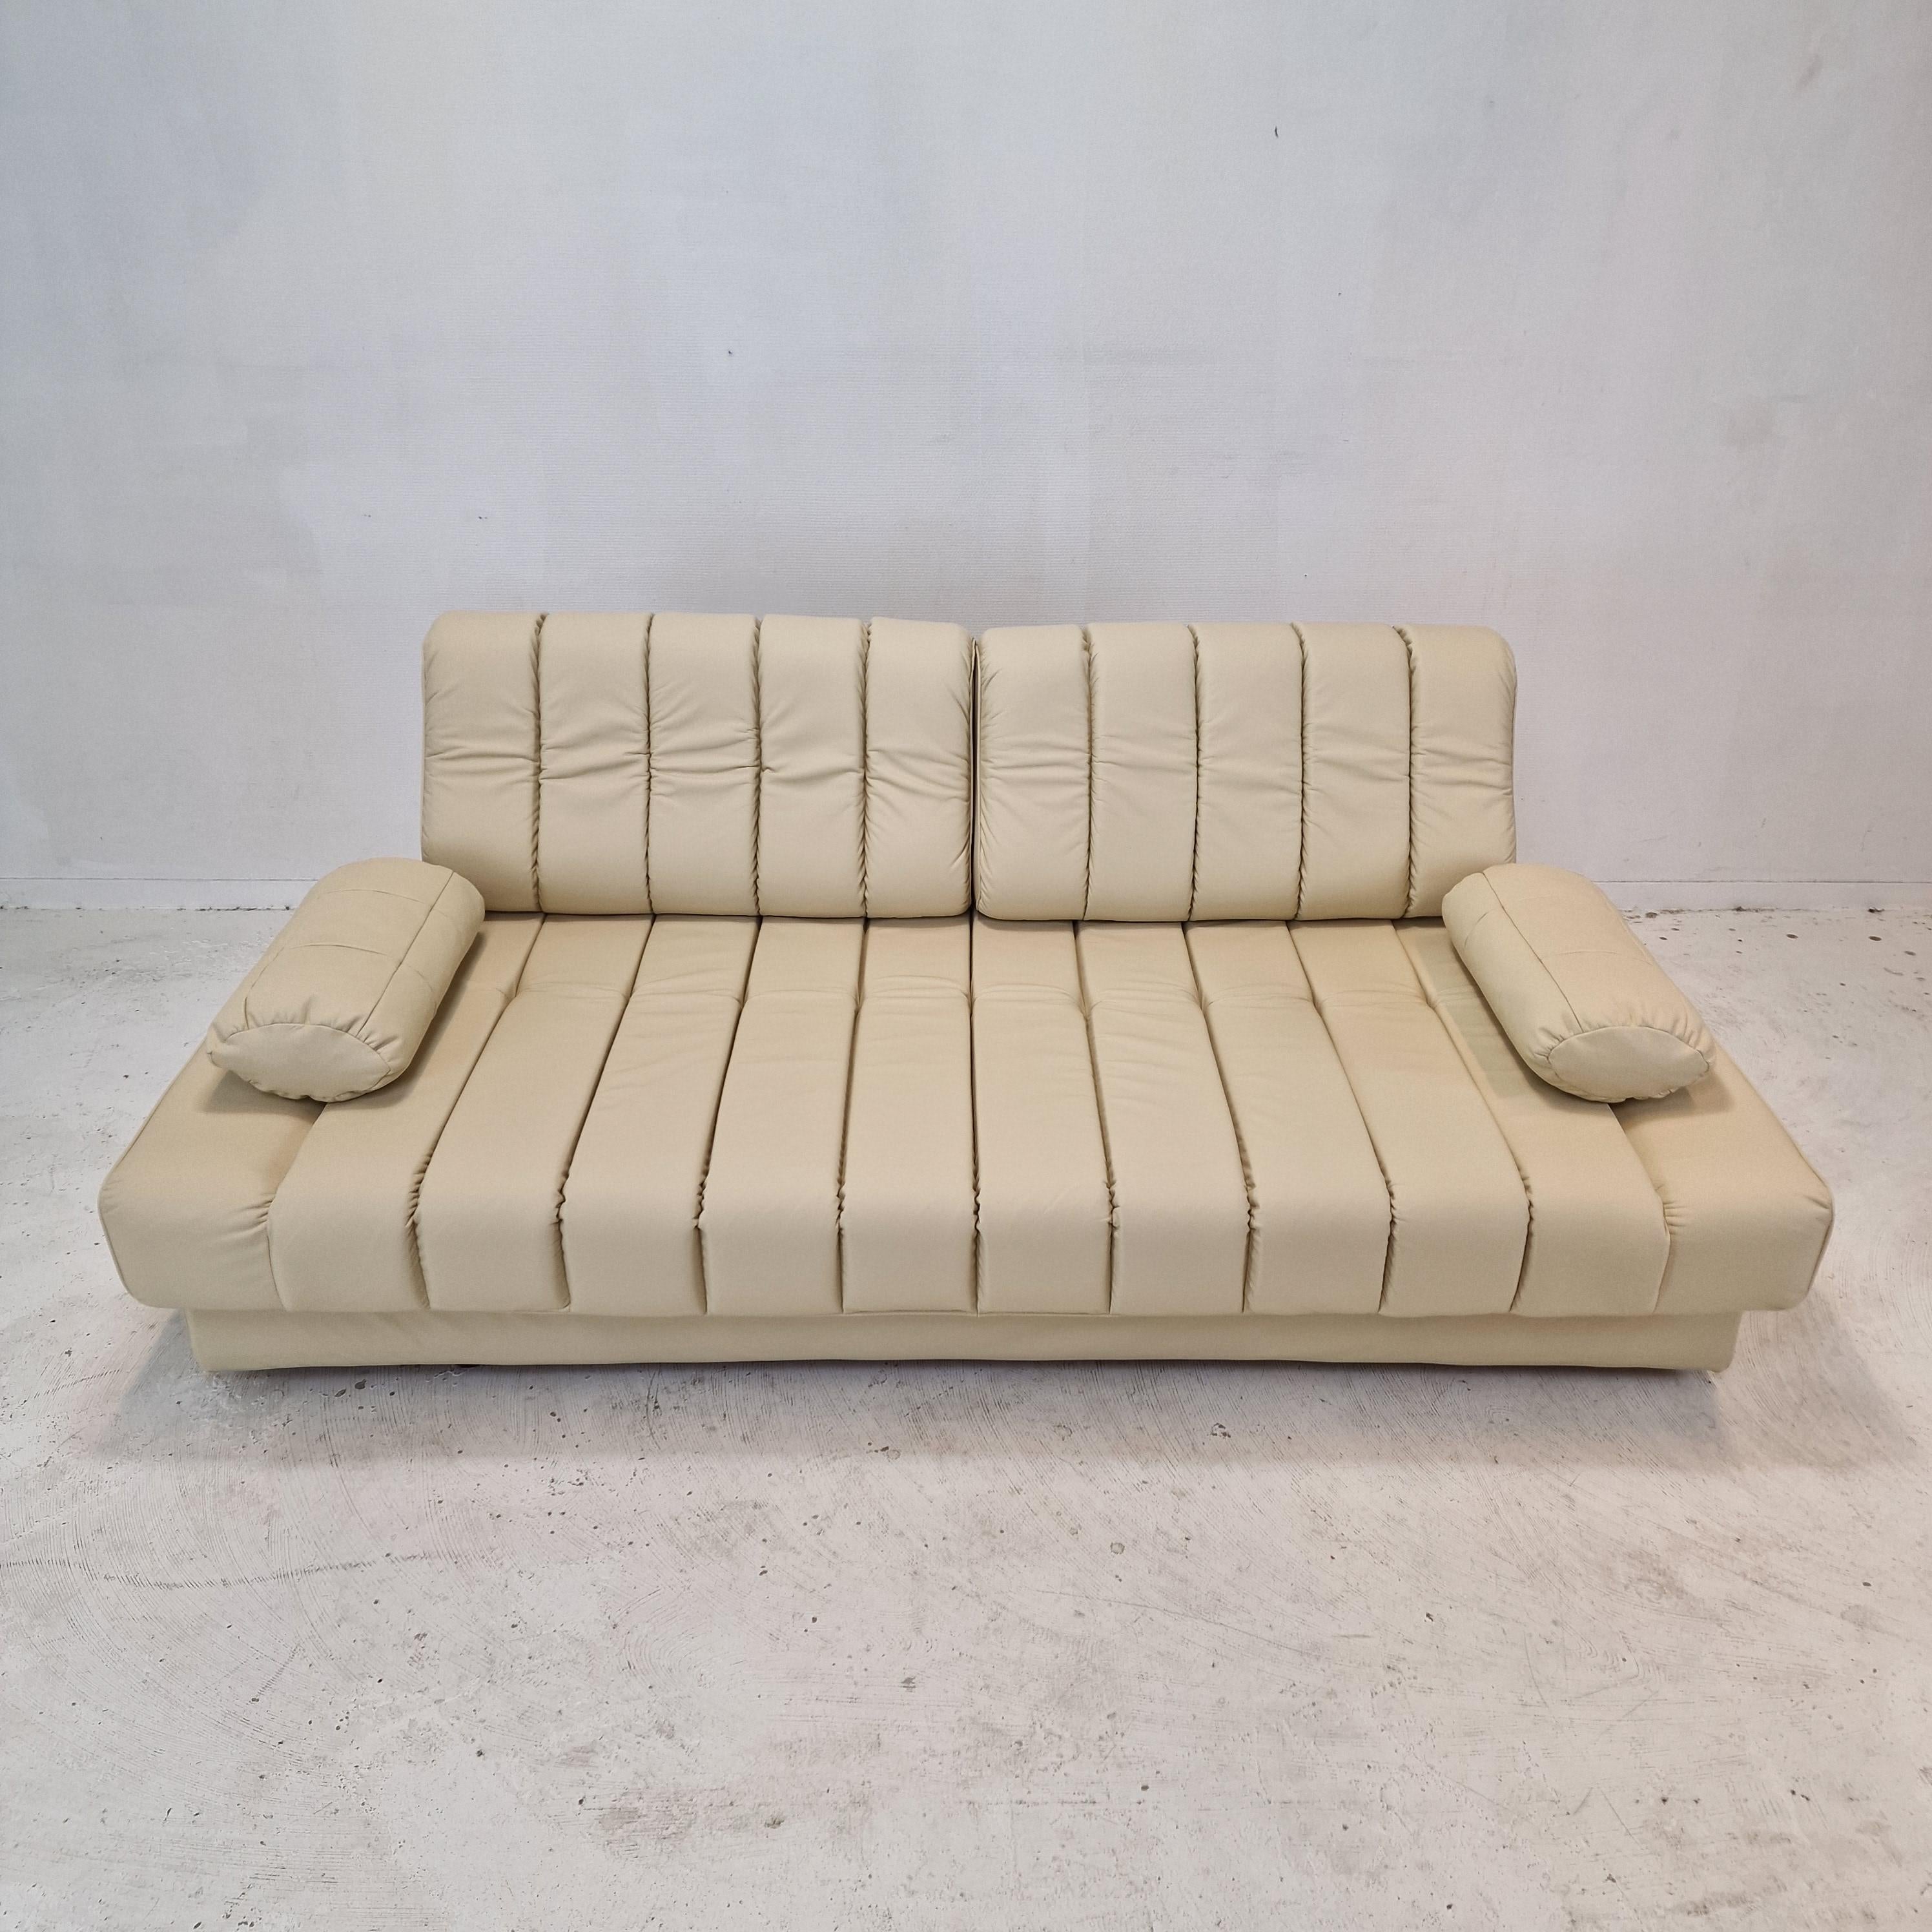 Leather DS-85 Sofa or Daybed by De Sede, Switzerland 1970s For Sale